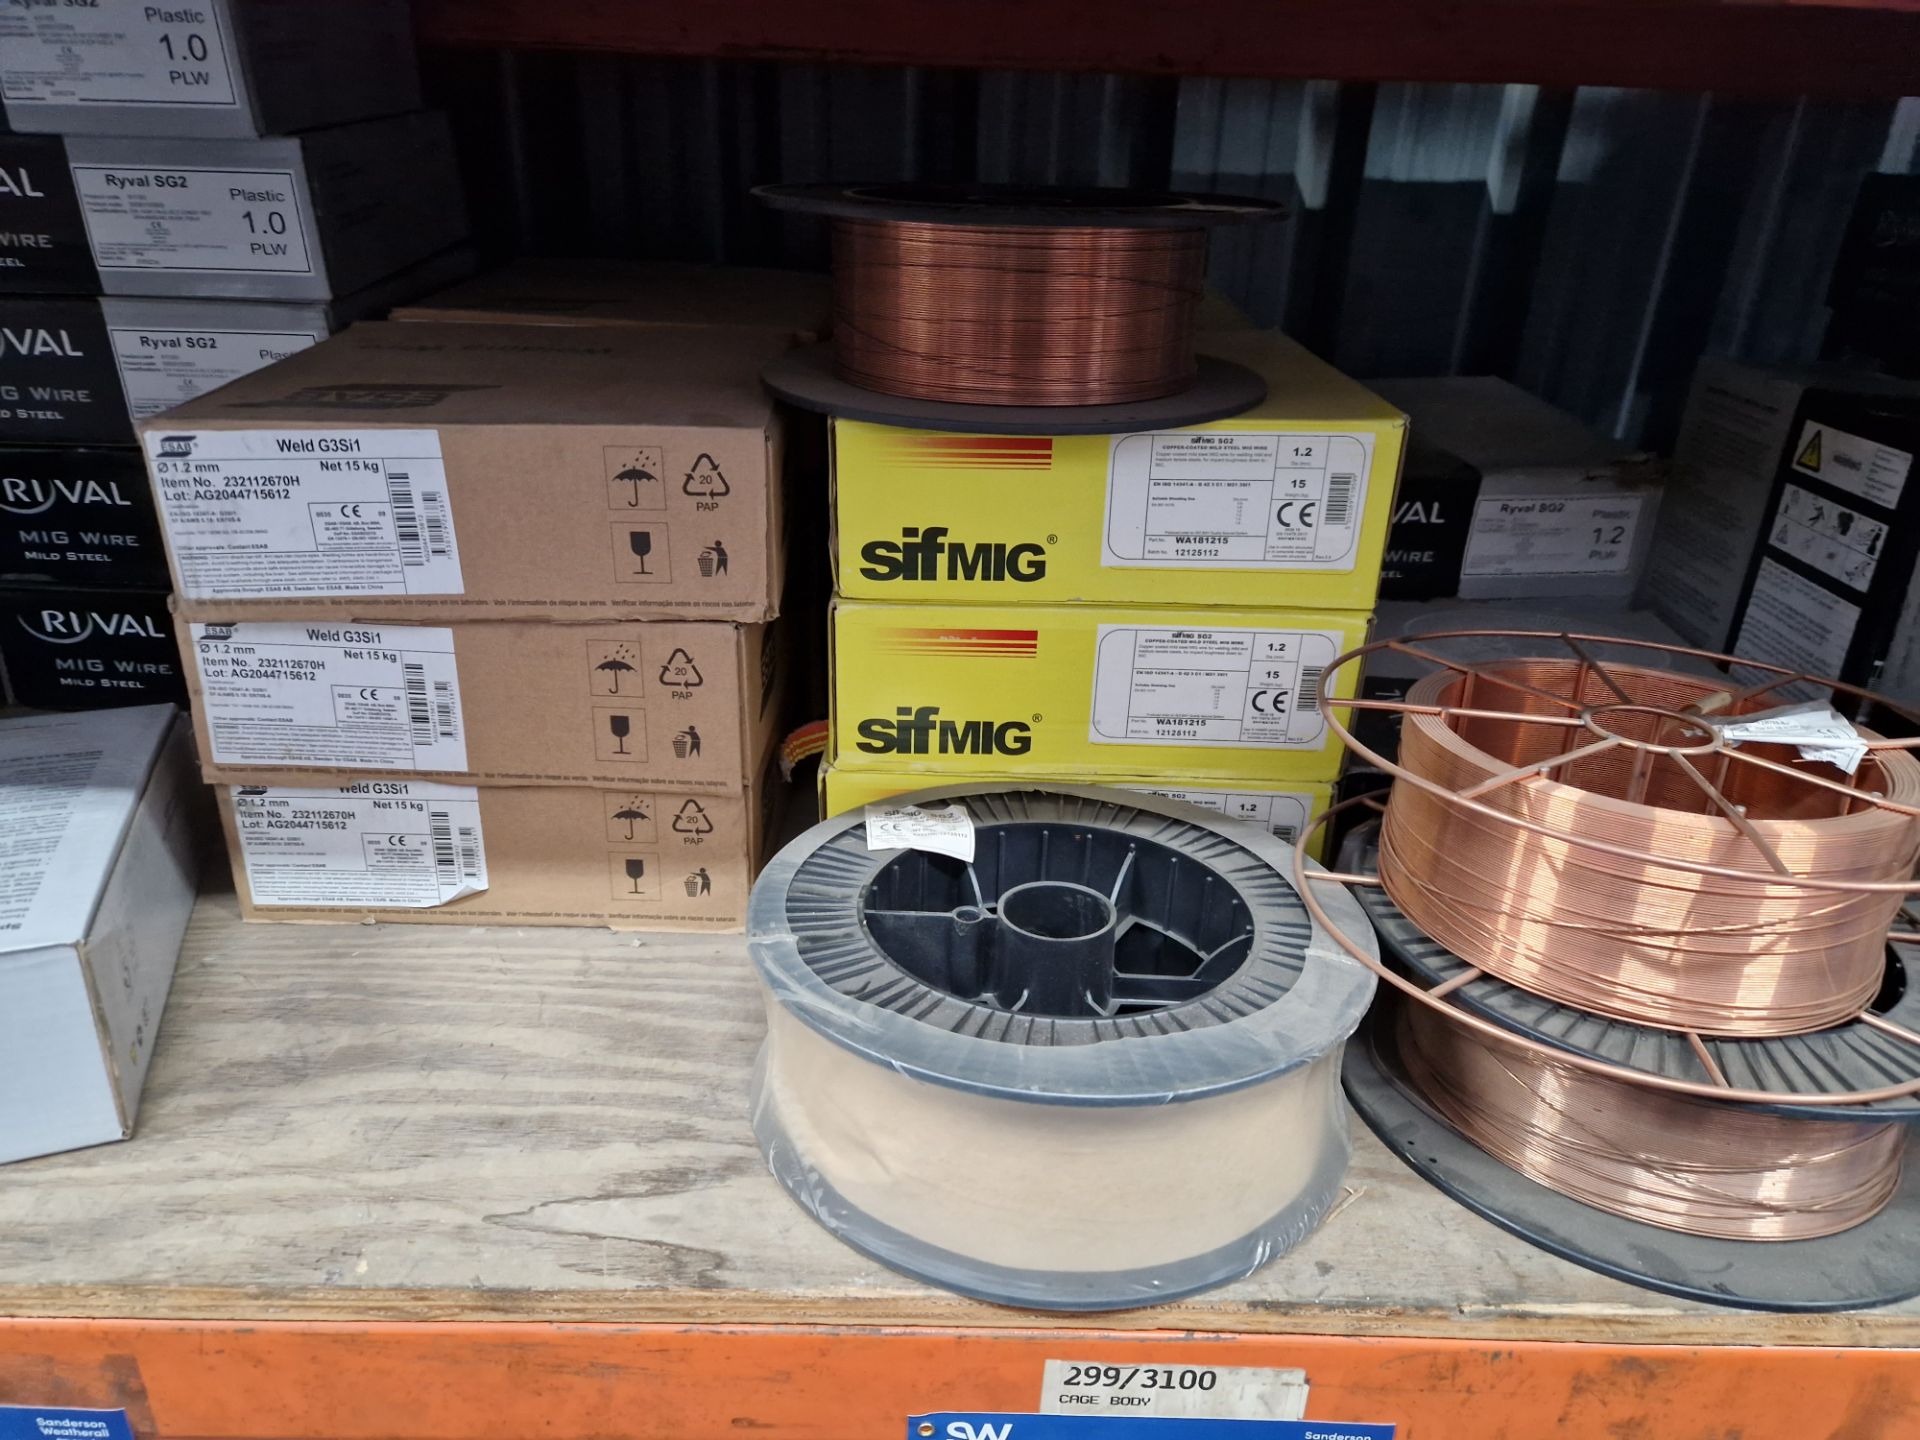 Quantity of Welding Wire, including 0.8PLW, 1.0PLW, WeldG35I1, Ryval SG2, SifmigSG2, etc Please read - Image 3 of 5